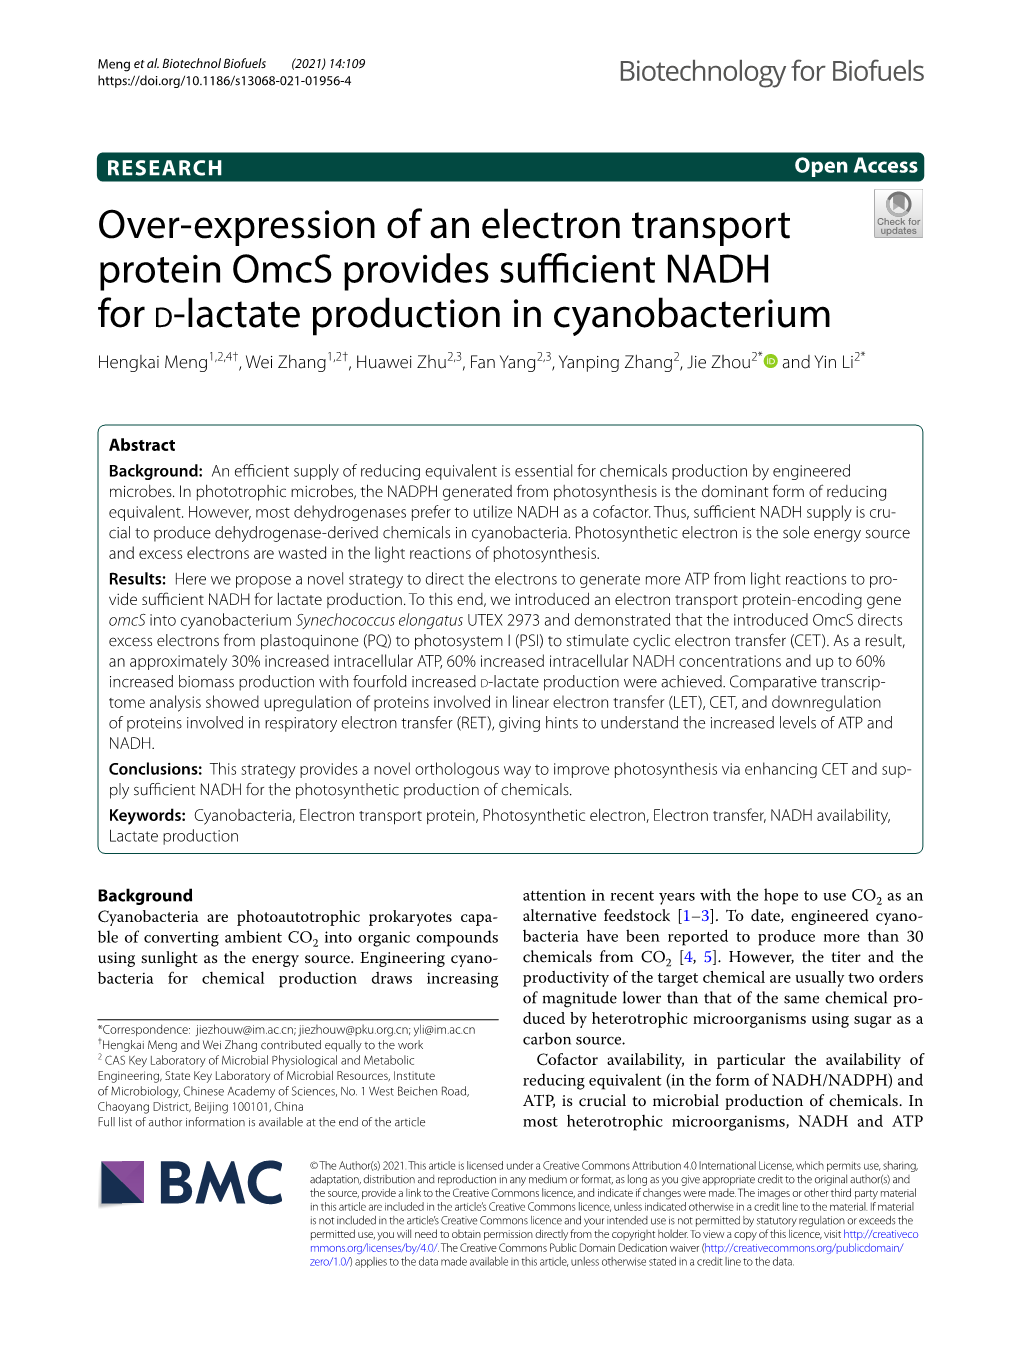 Over-Expression of an Electron Transport Protein Omcs Provides